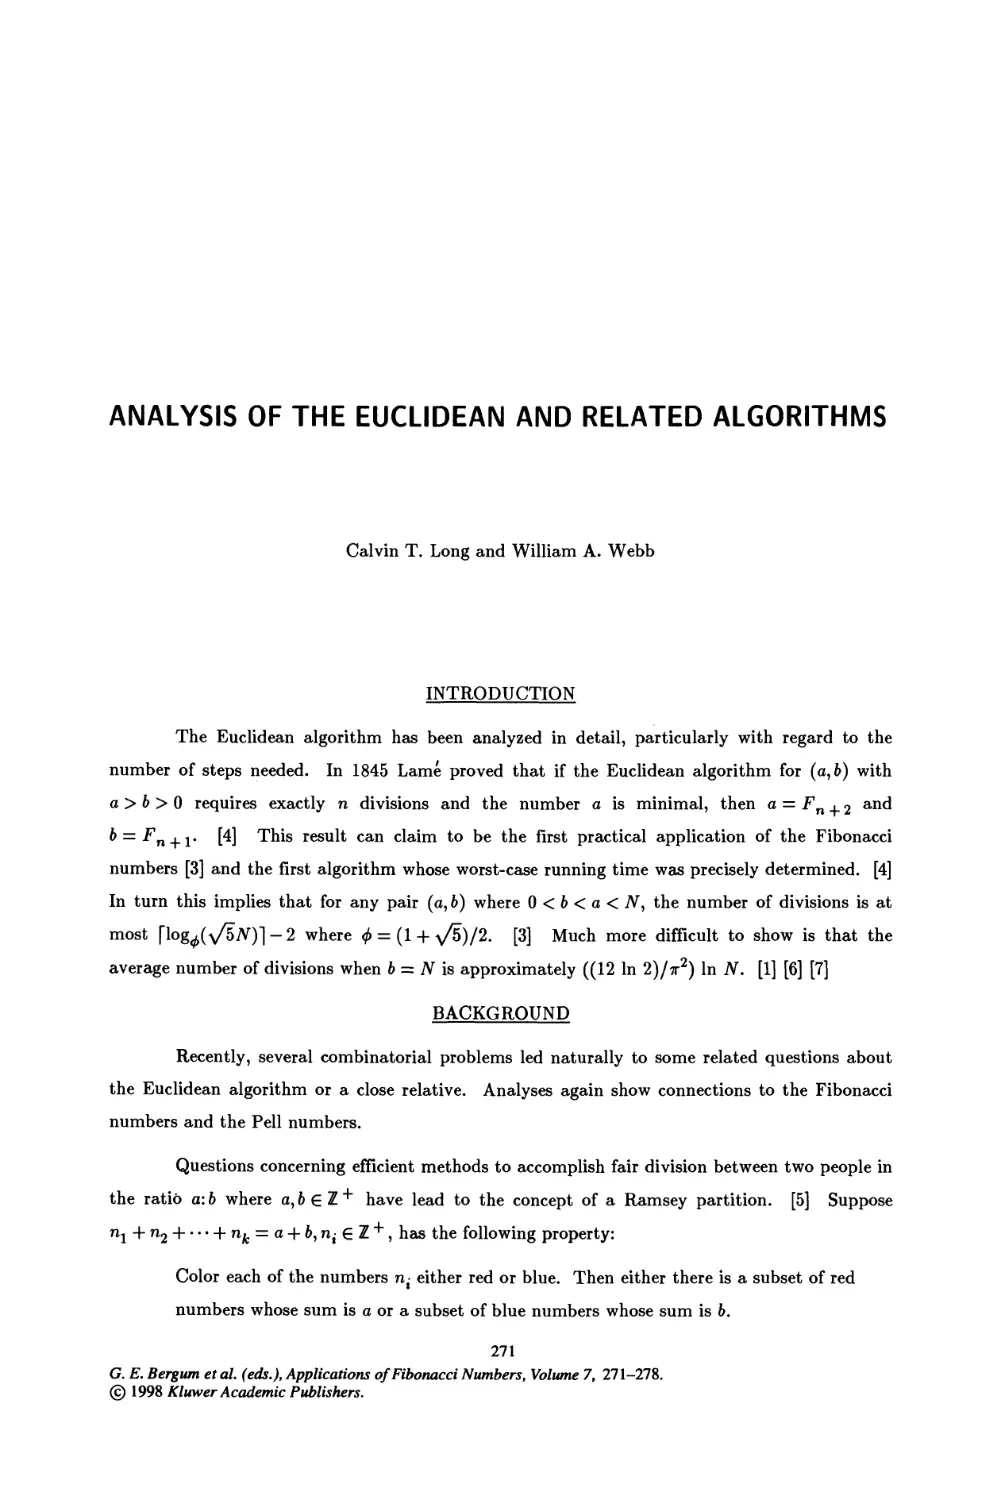 30. Analysis of the Euclidean and Related Algorithms